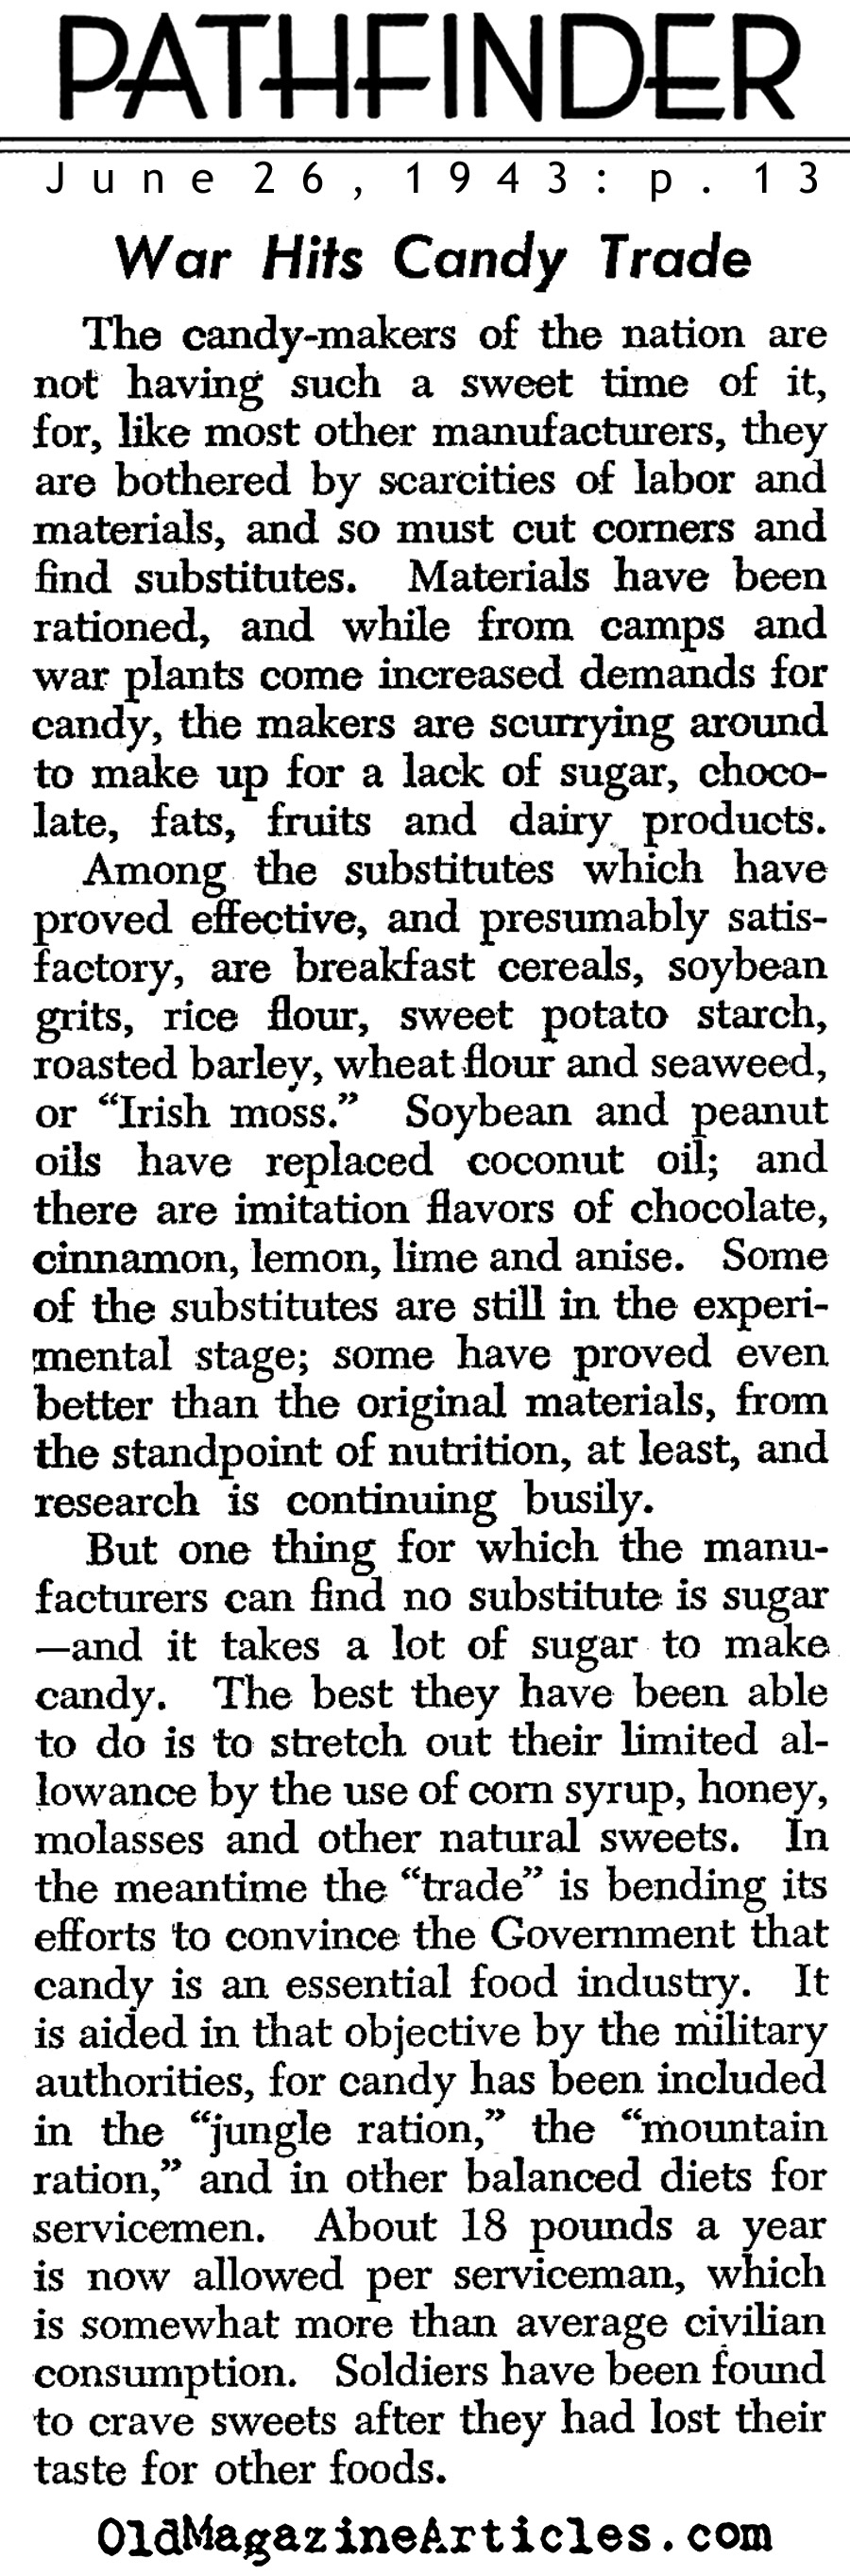 Sugar Rationing Hits The Candy Industry (Pathfinder Magazine, 1943)